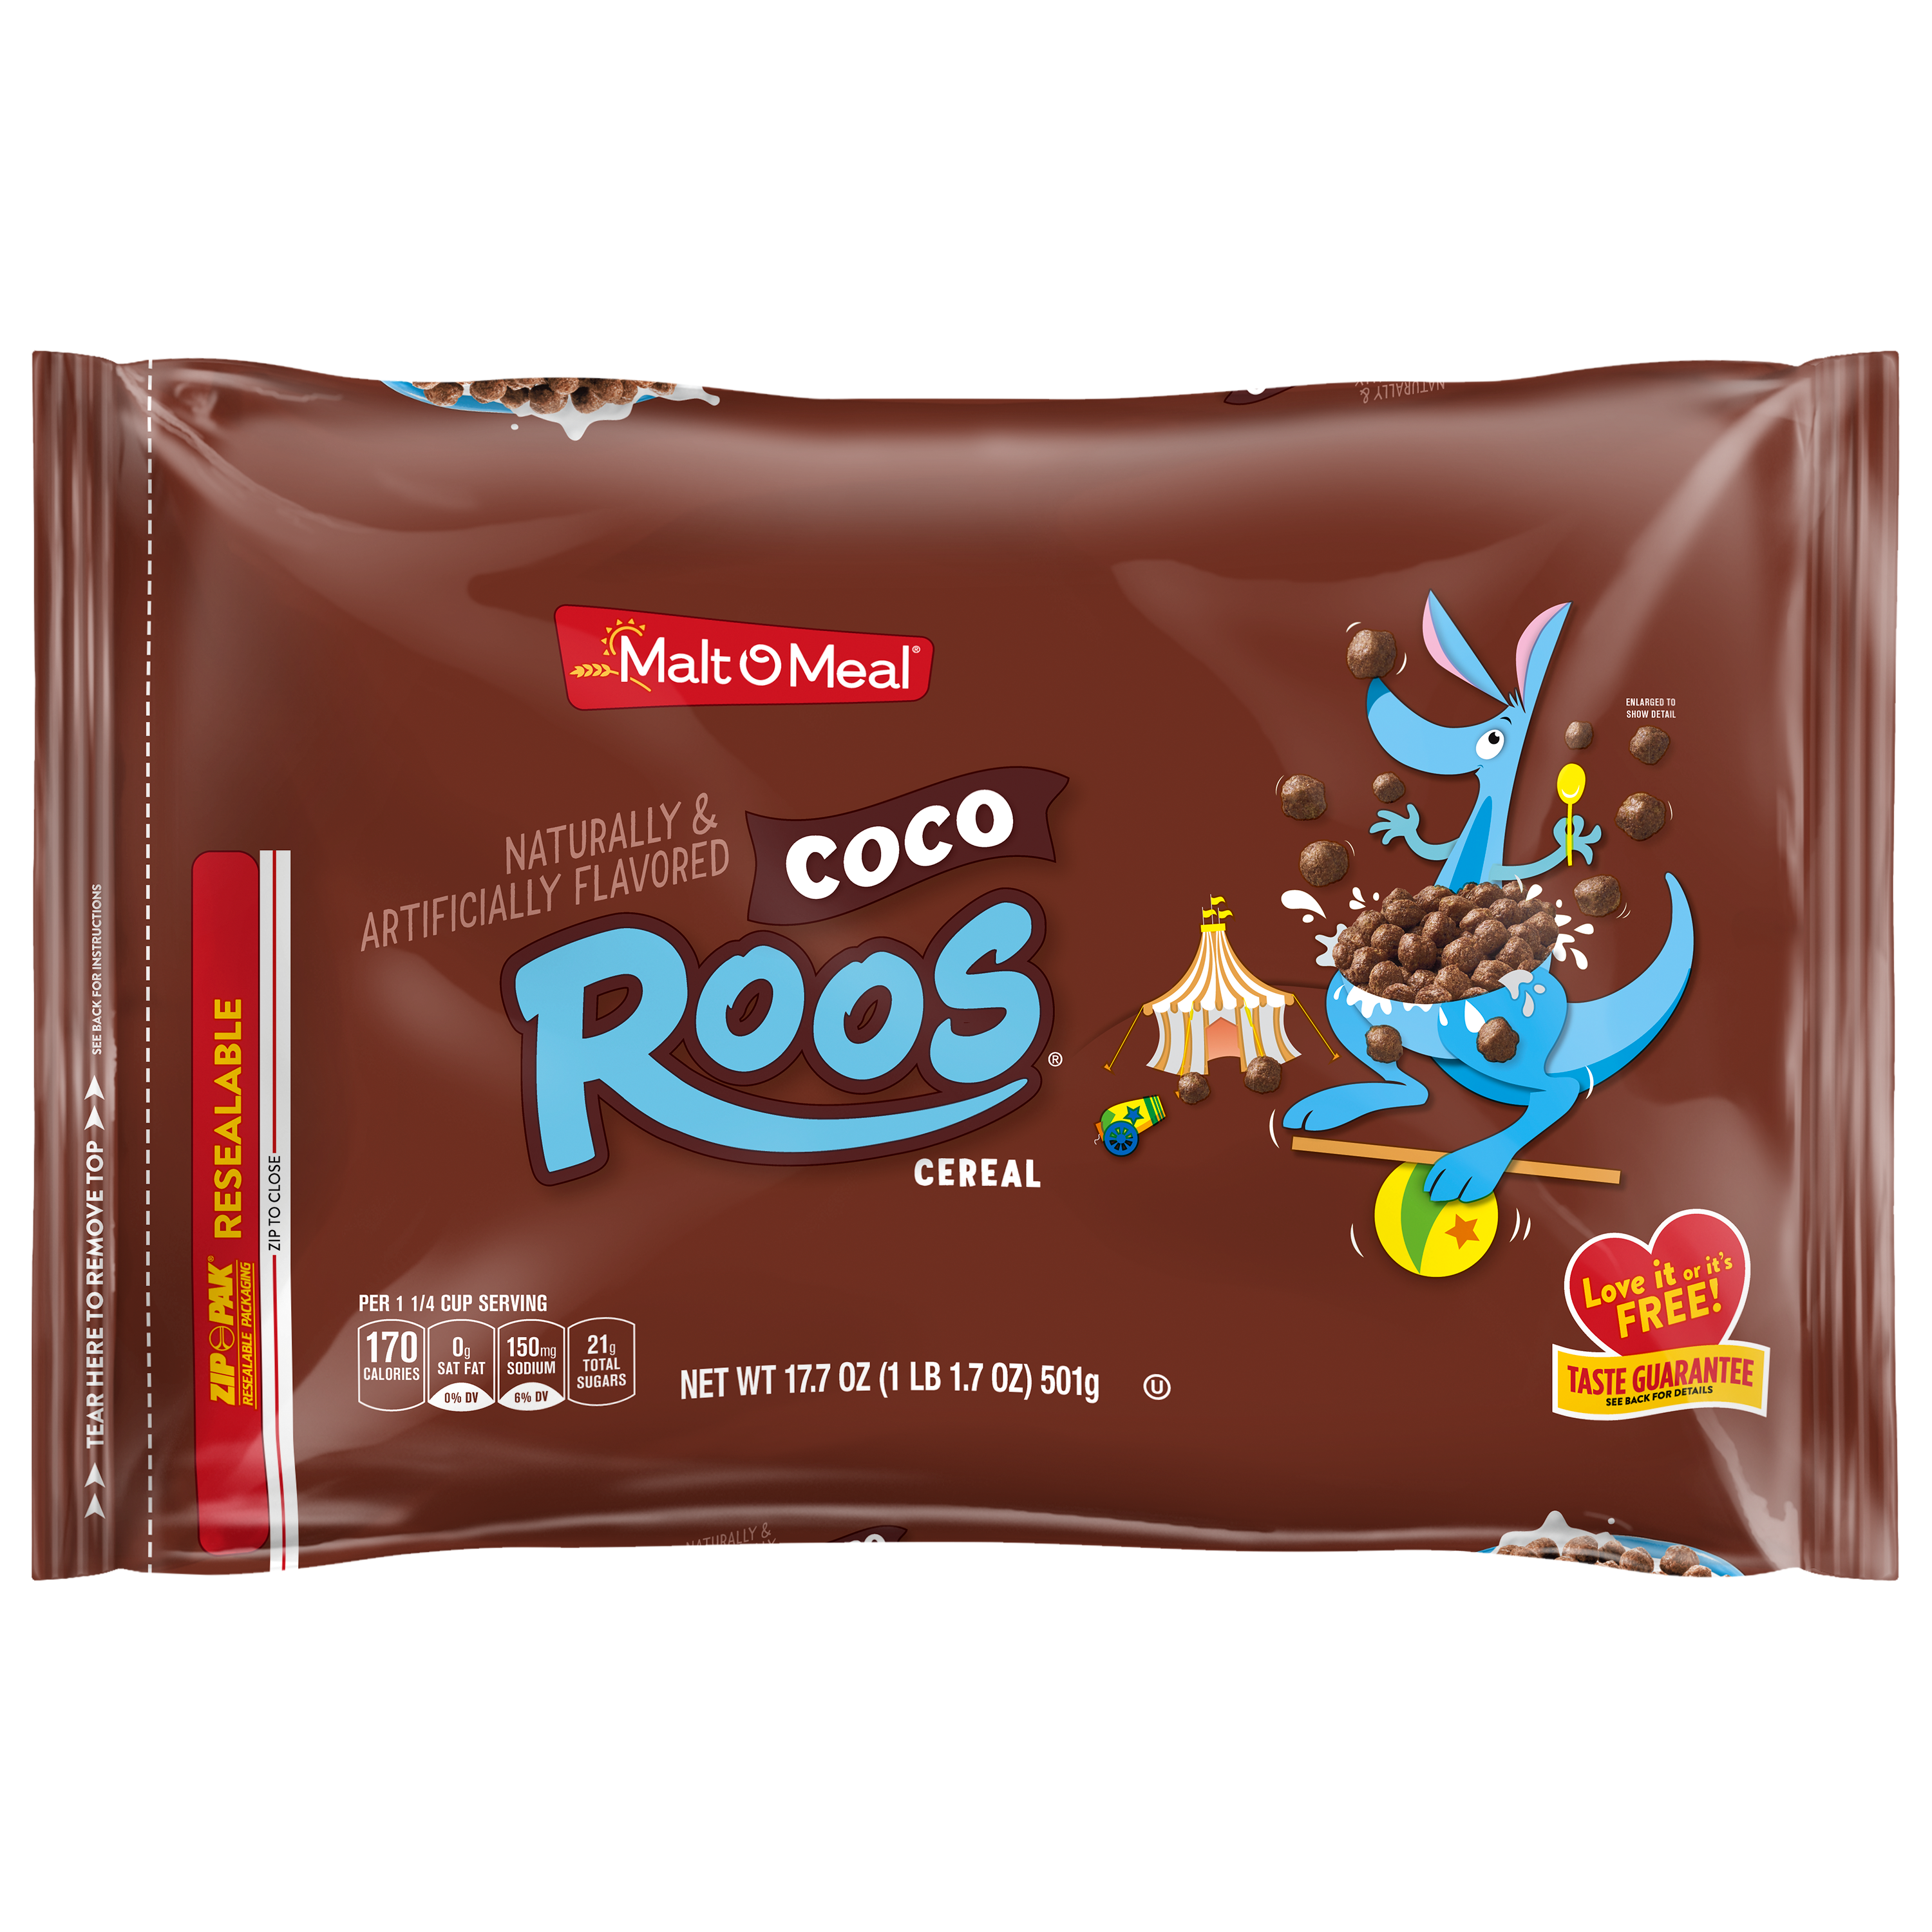 Malt-O-Meal Cocoa Roos cereal